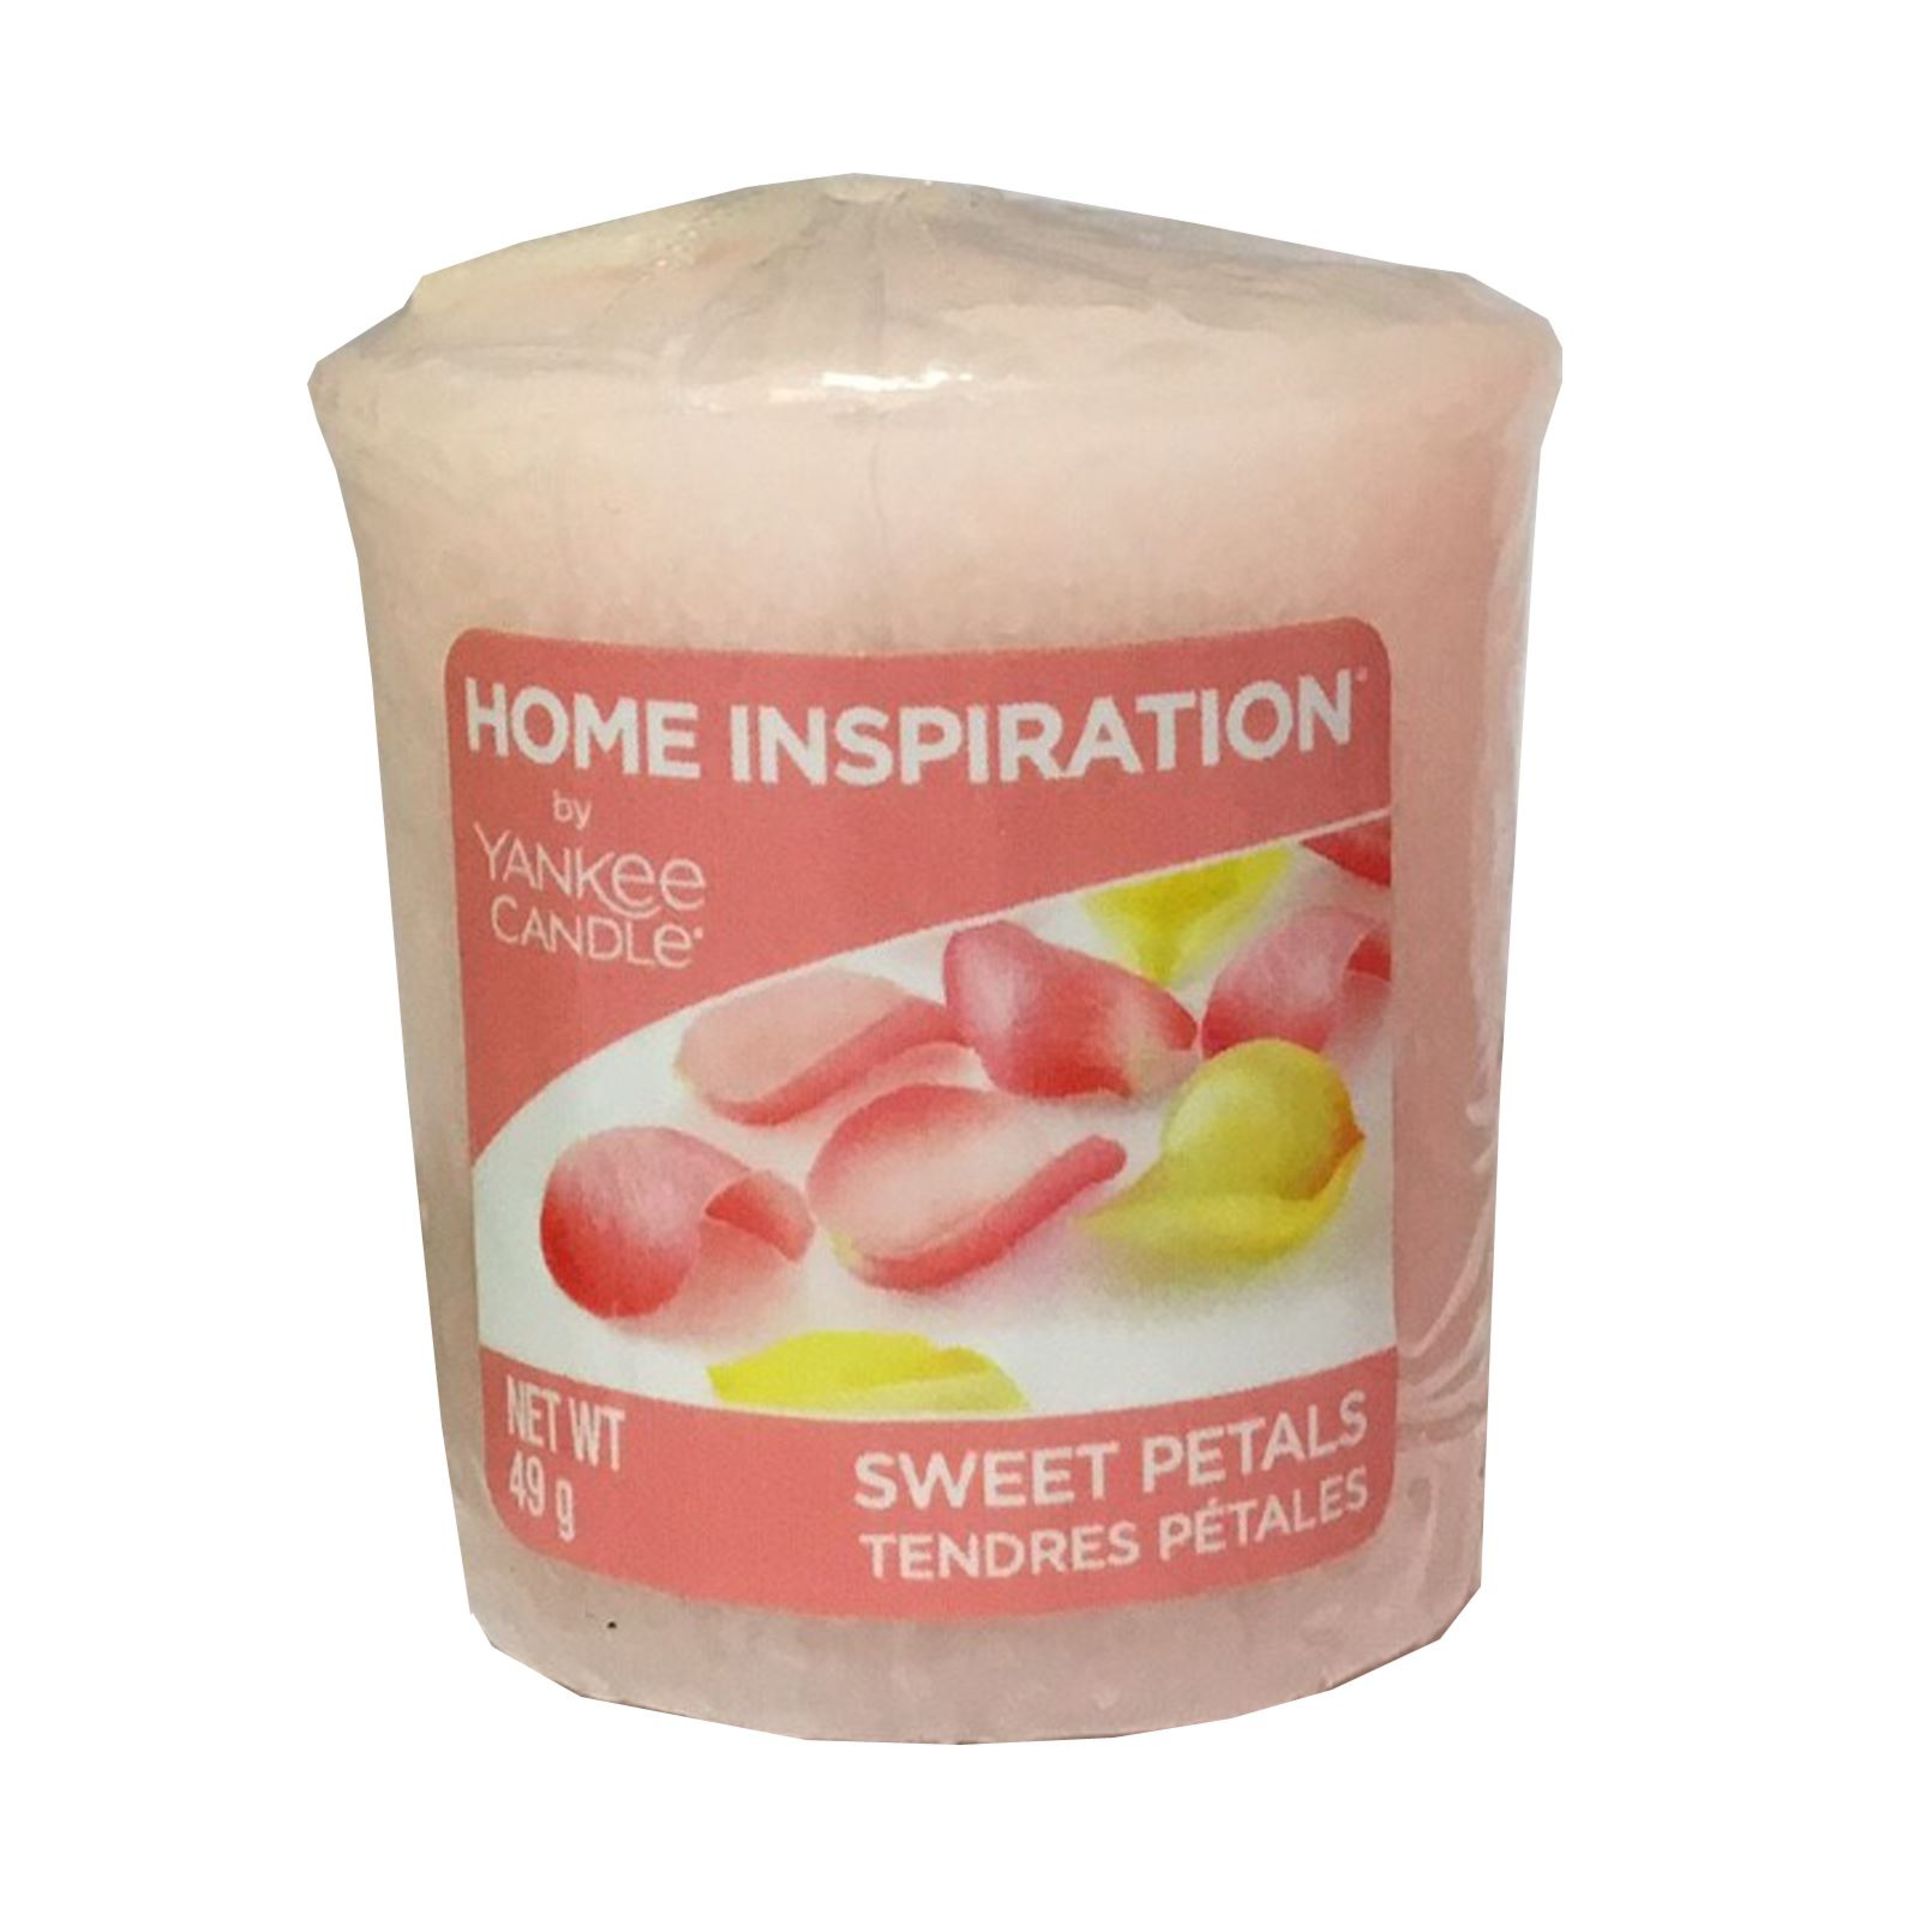 V *TRADE QTY* Brand New 18 X Yankee Candle Votive Sweet Petals - eBay Price £107.82 X 50 YOUR BID - Image 2 of 2